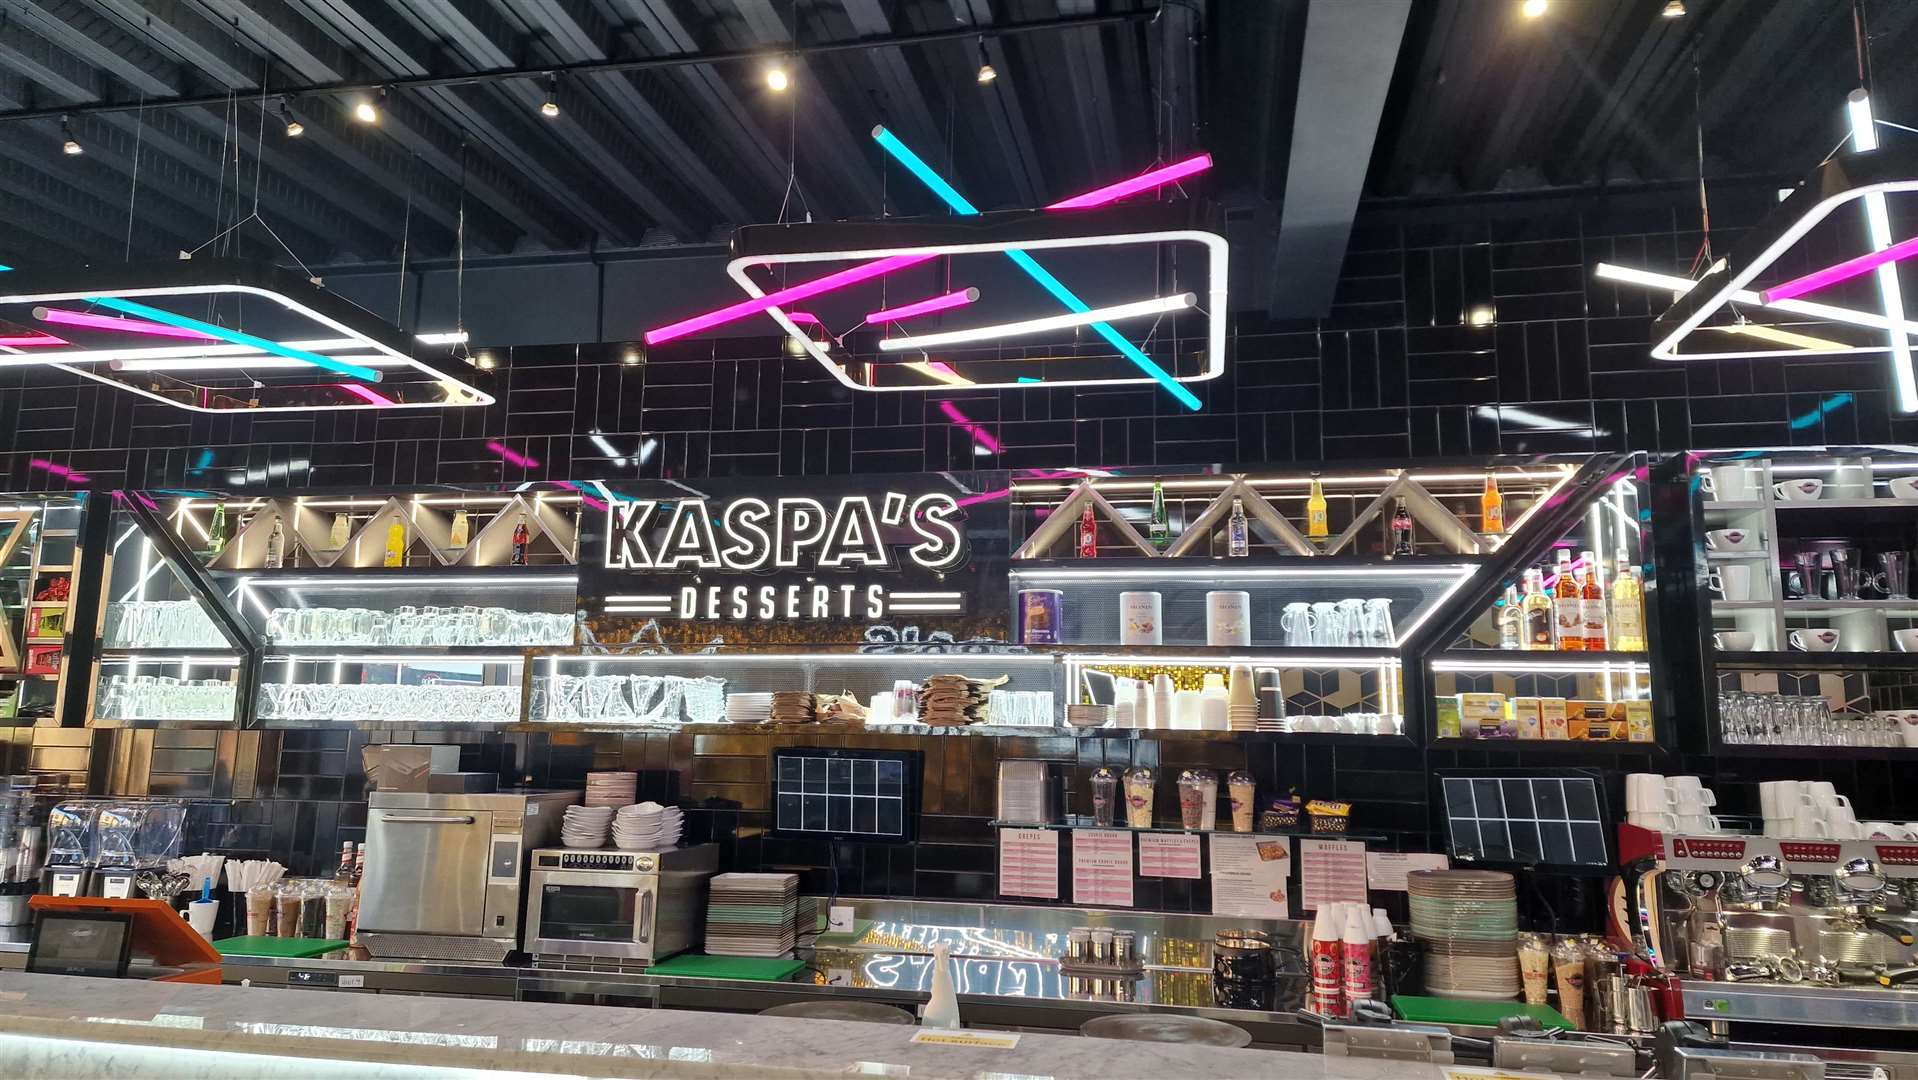 Kaspa's Desserts will open a new branch at Chatham Dockside. Picture: Kaspa's Desserts